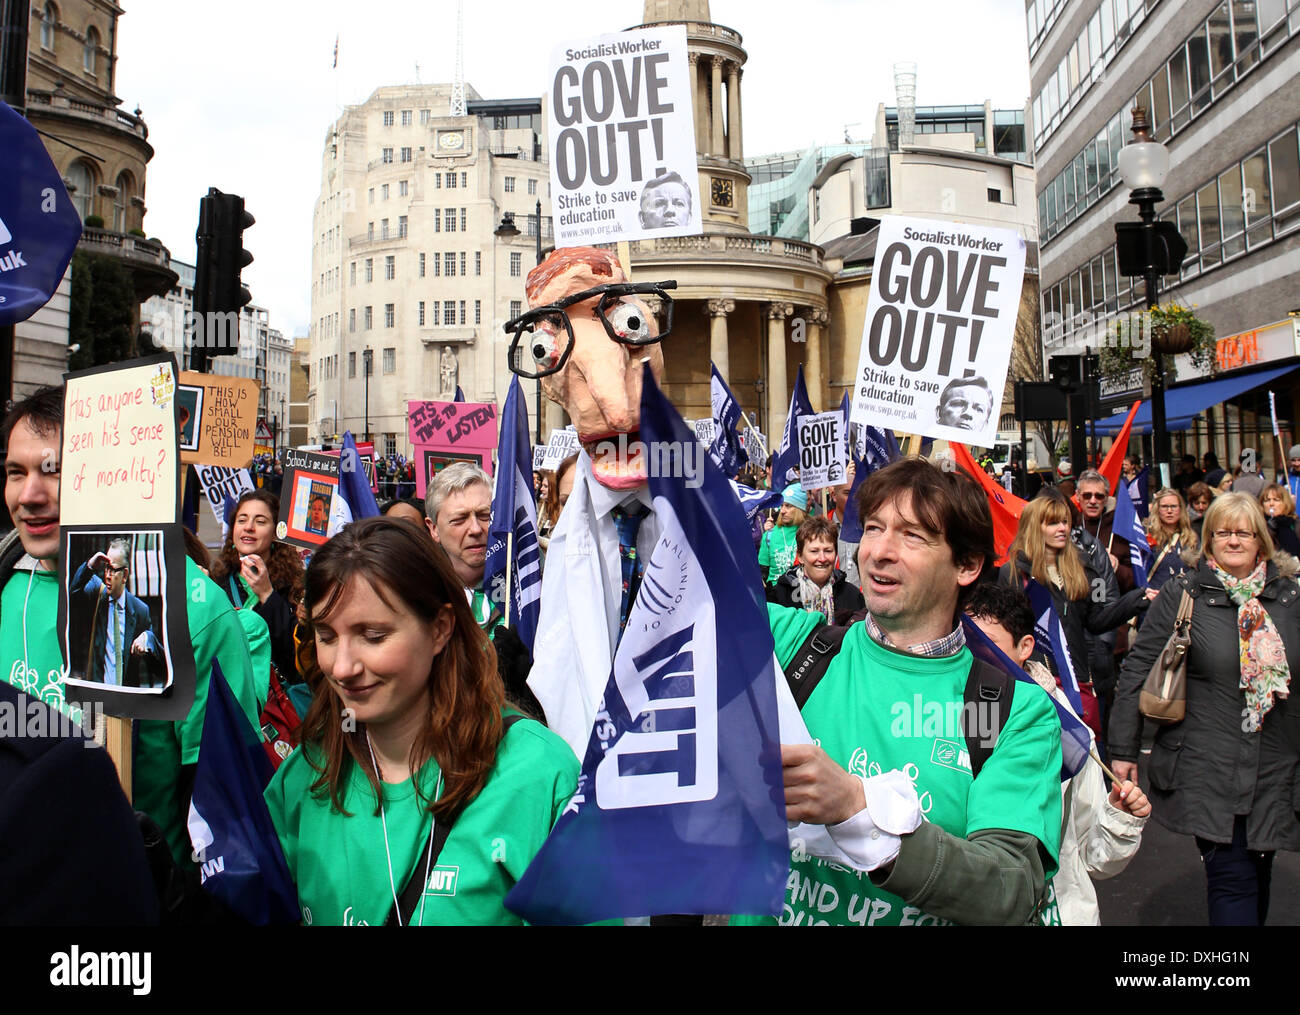 Thousands of Teachers strike and marched through central London in protest against Education Secretary Michael Gove's proposed pension cuts and education reforms including performance-related pay and longer hours in central London, UK, on Wednesday, 25 March, 2014. Stock Photo